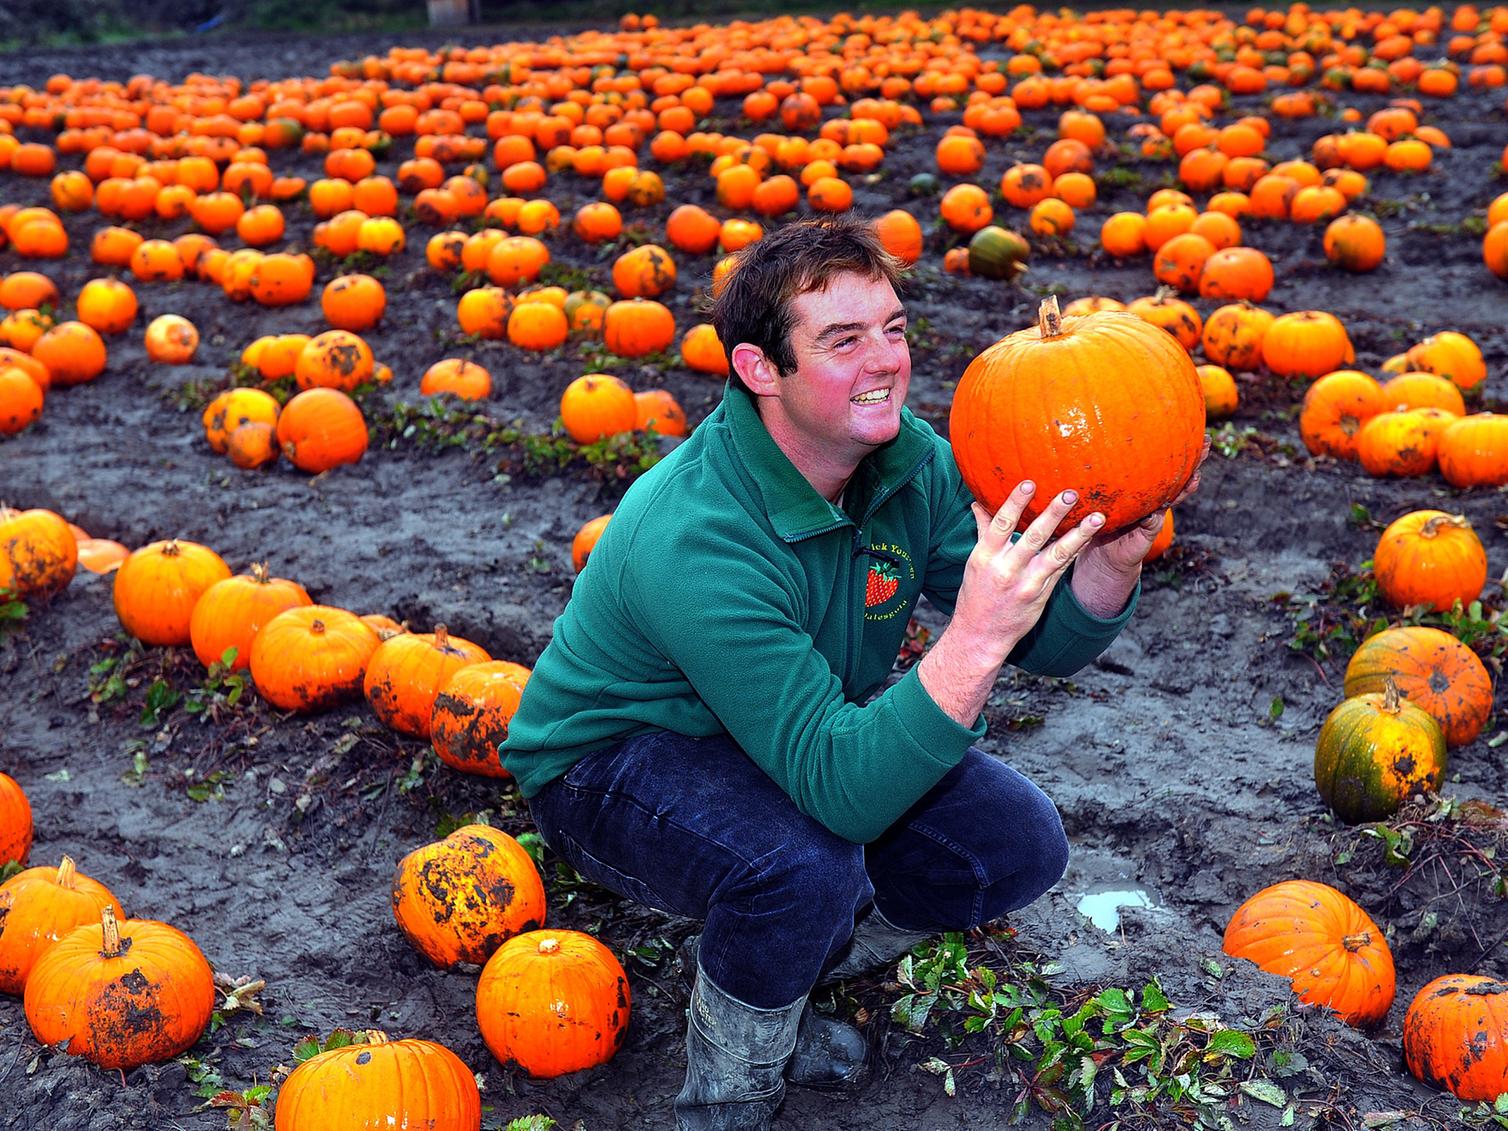 Joe Kemp checking a giant pumpkin at West End Lane Farm, LS18 5ES (open daily, October 18-31, 10am-5pm, no booking required).